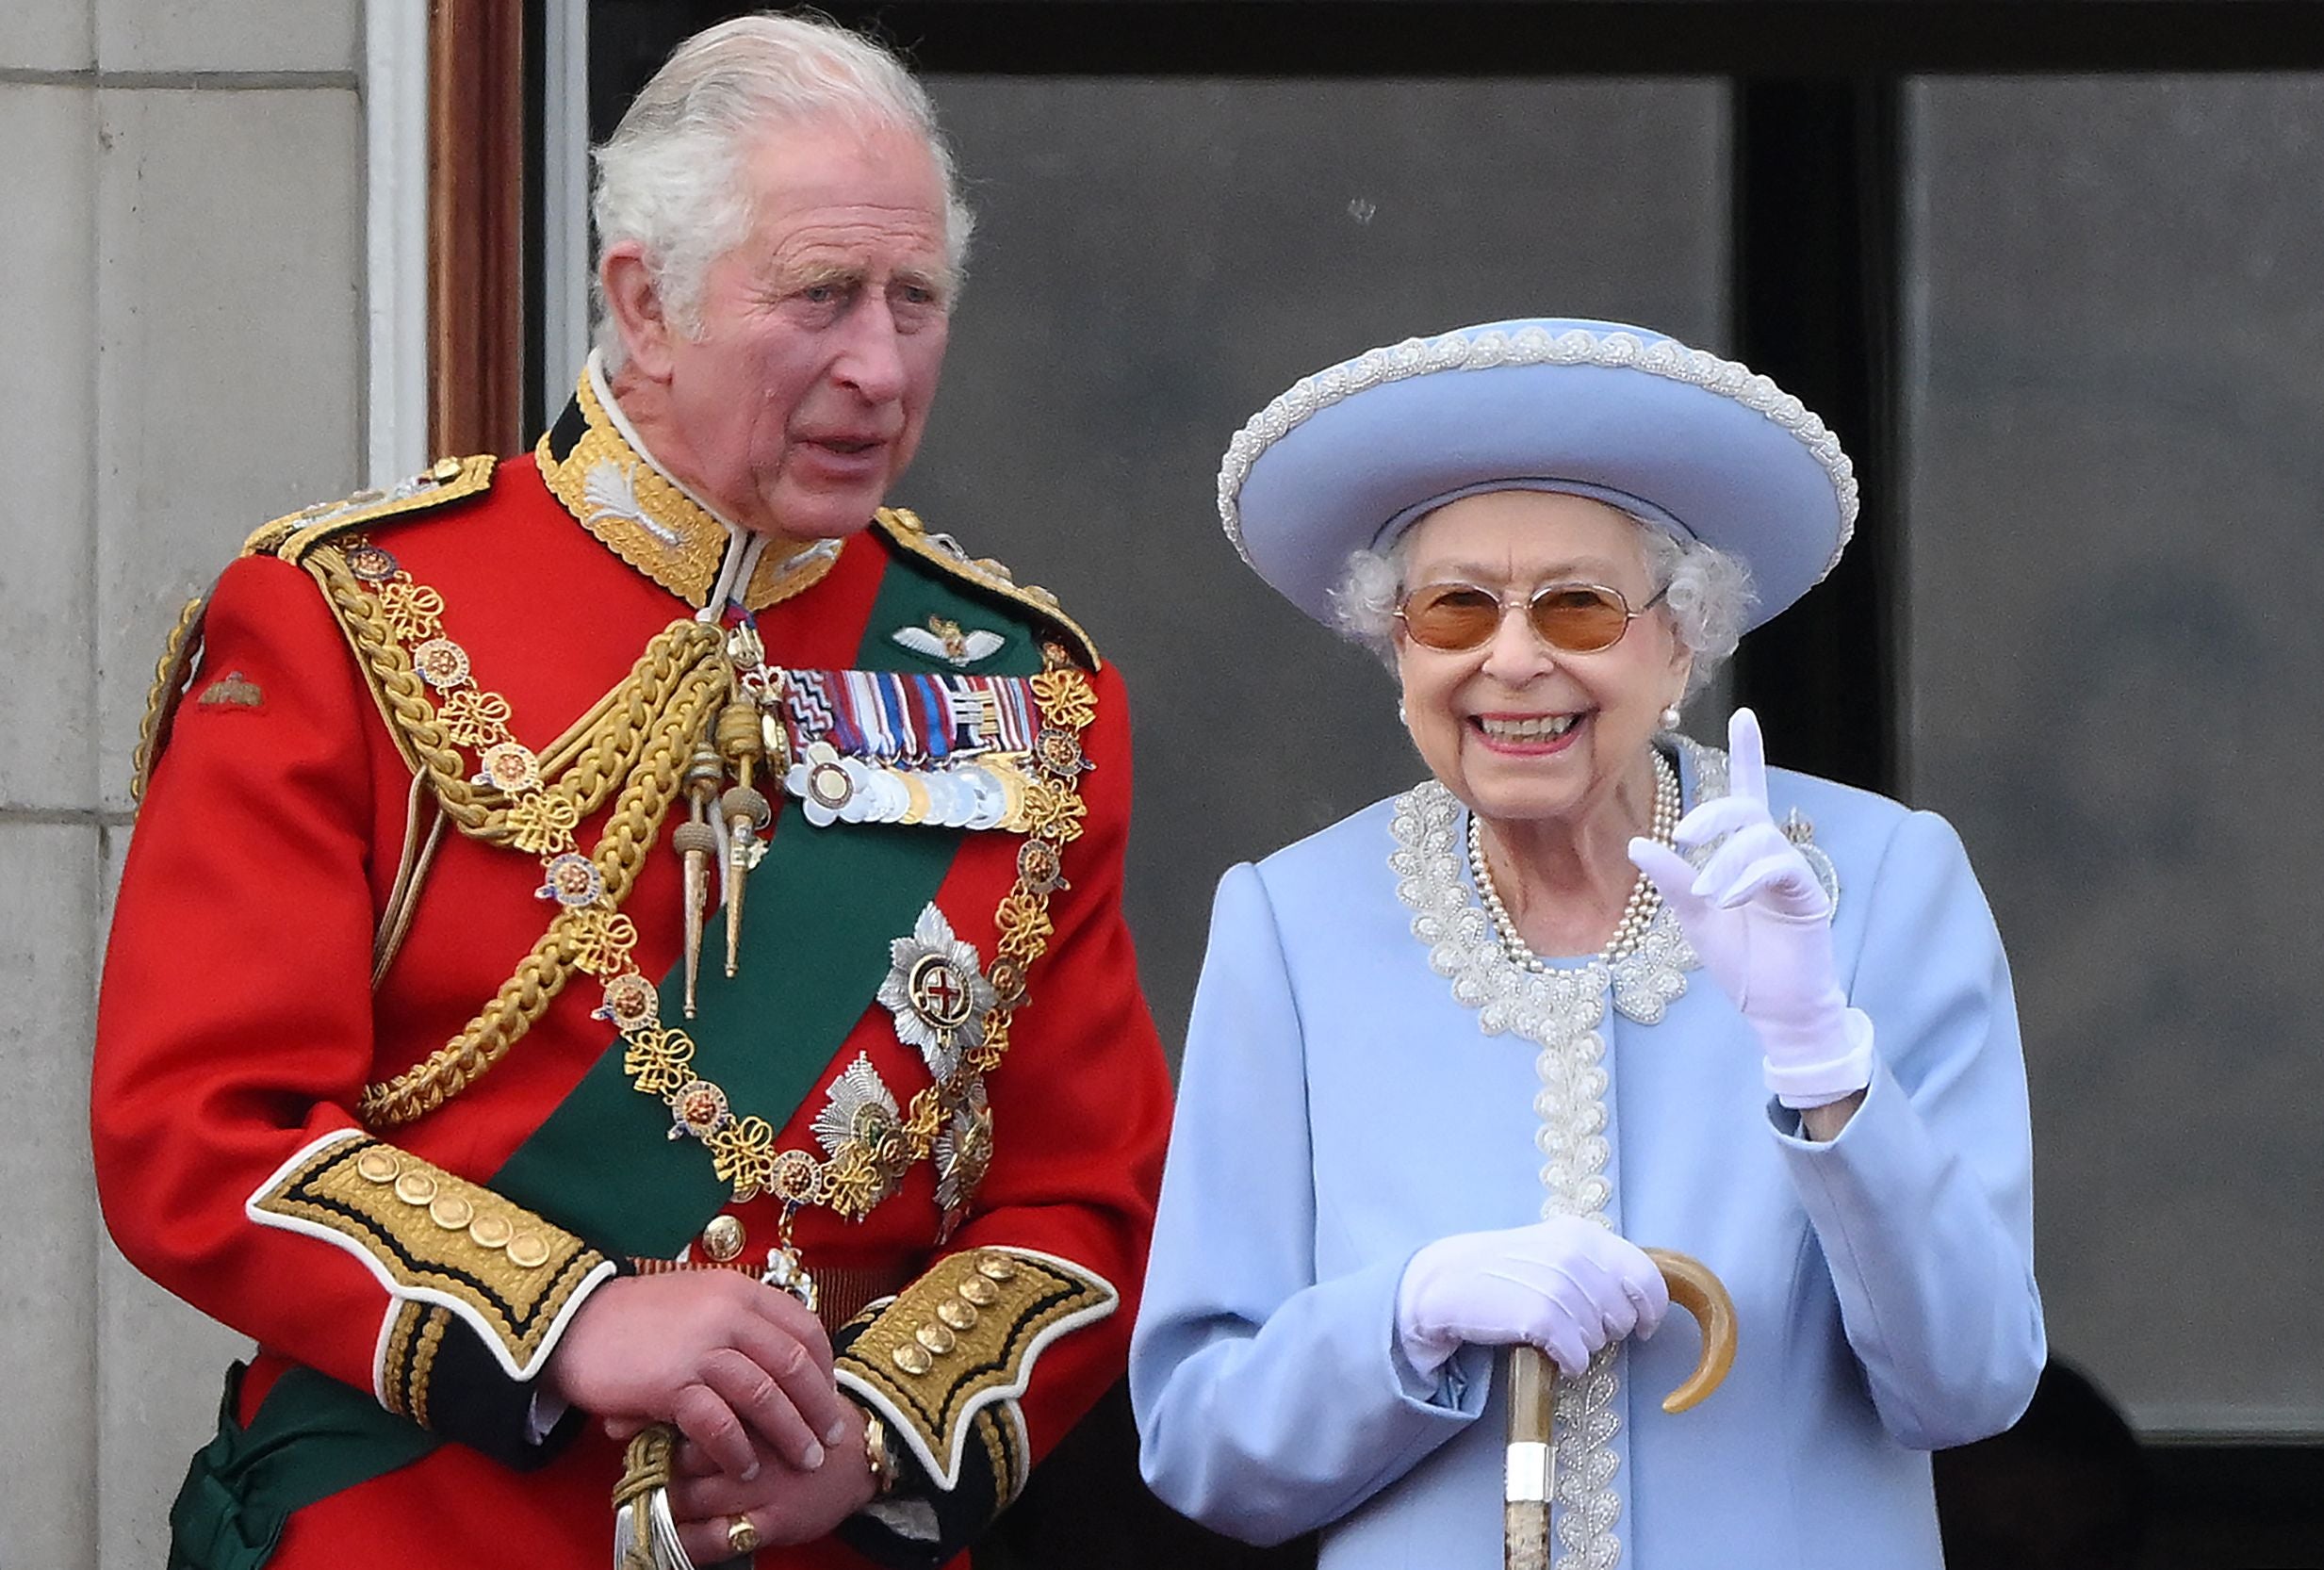 The Queen celebrated 70 years on the throne with multiple celebrations over the four-day bank holiday weekend